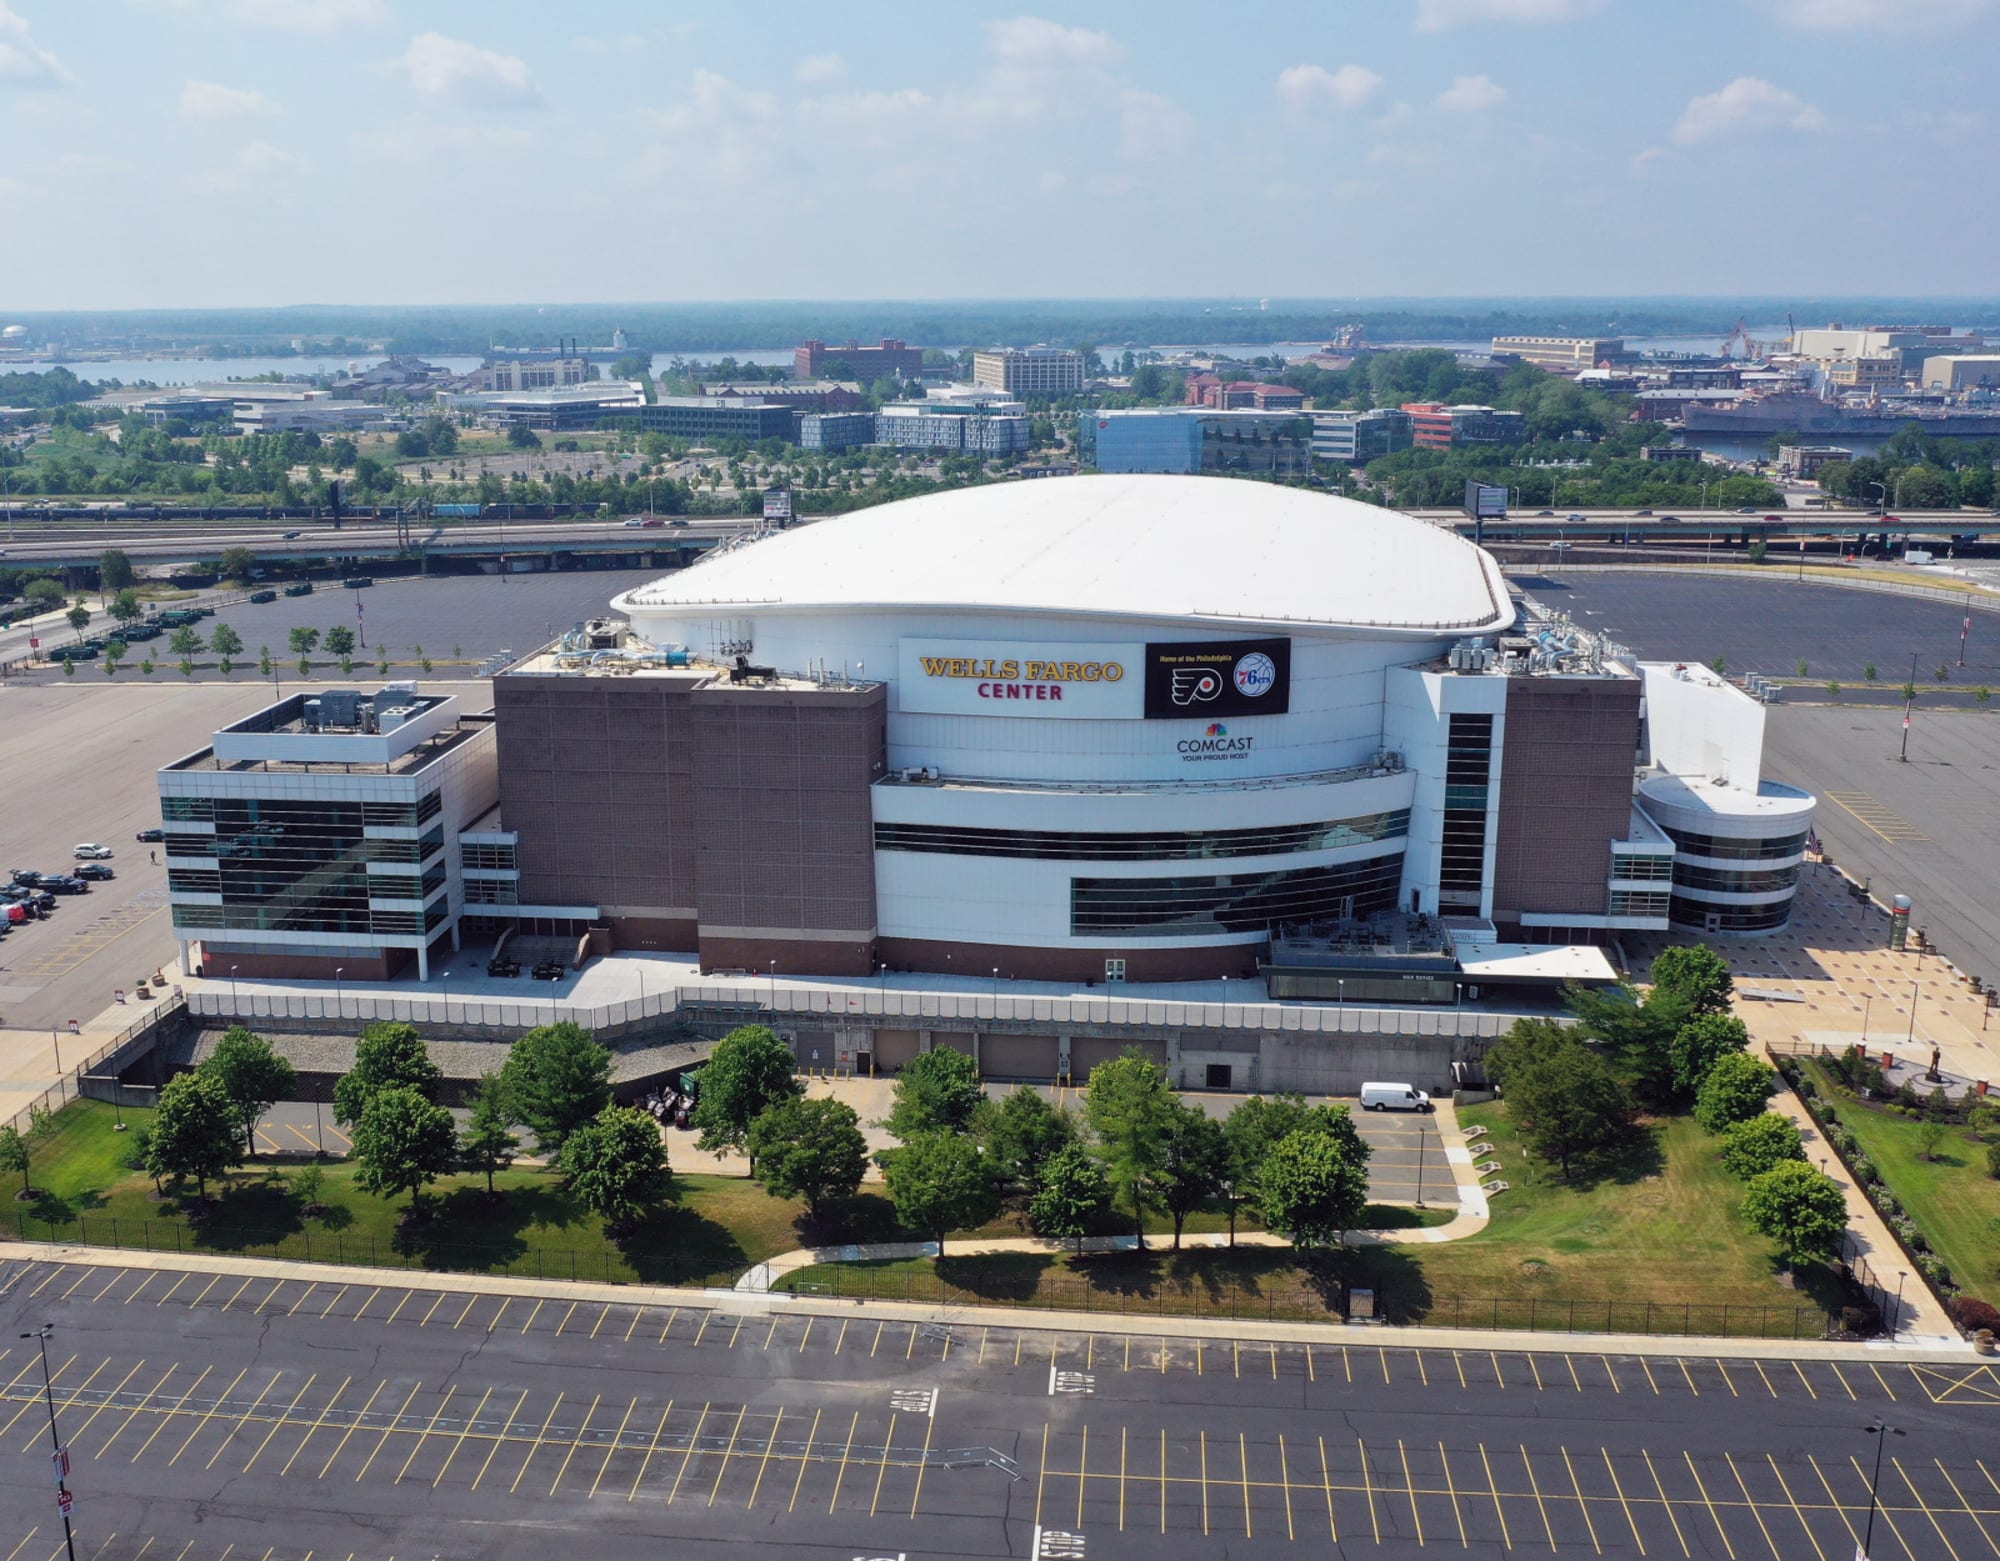 Wells Fargo Center to Hold First Public Event since COVID19